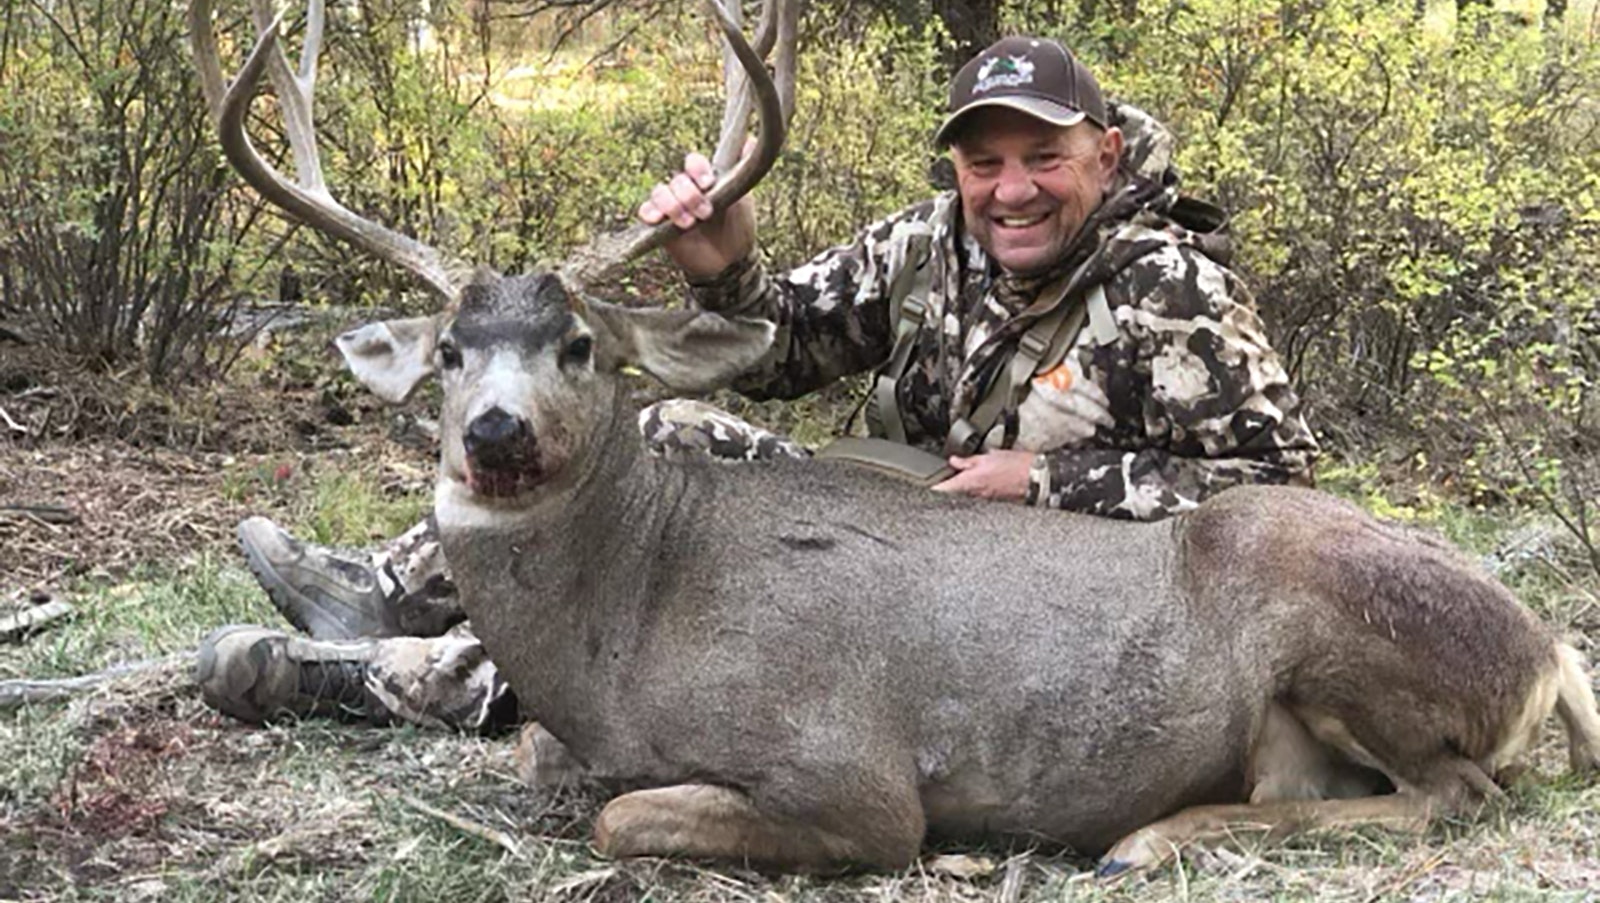 Joe Capone of Ohio has hunted Western big game, including this huge New Mexico mule deer buck. He hopes to hunt Wyoming next.